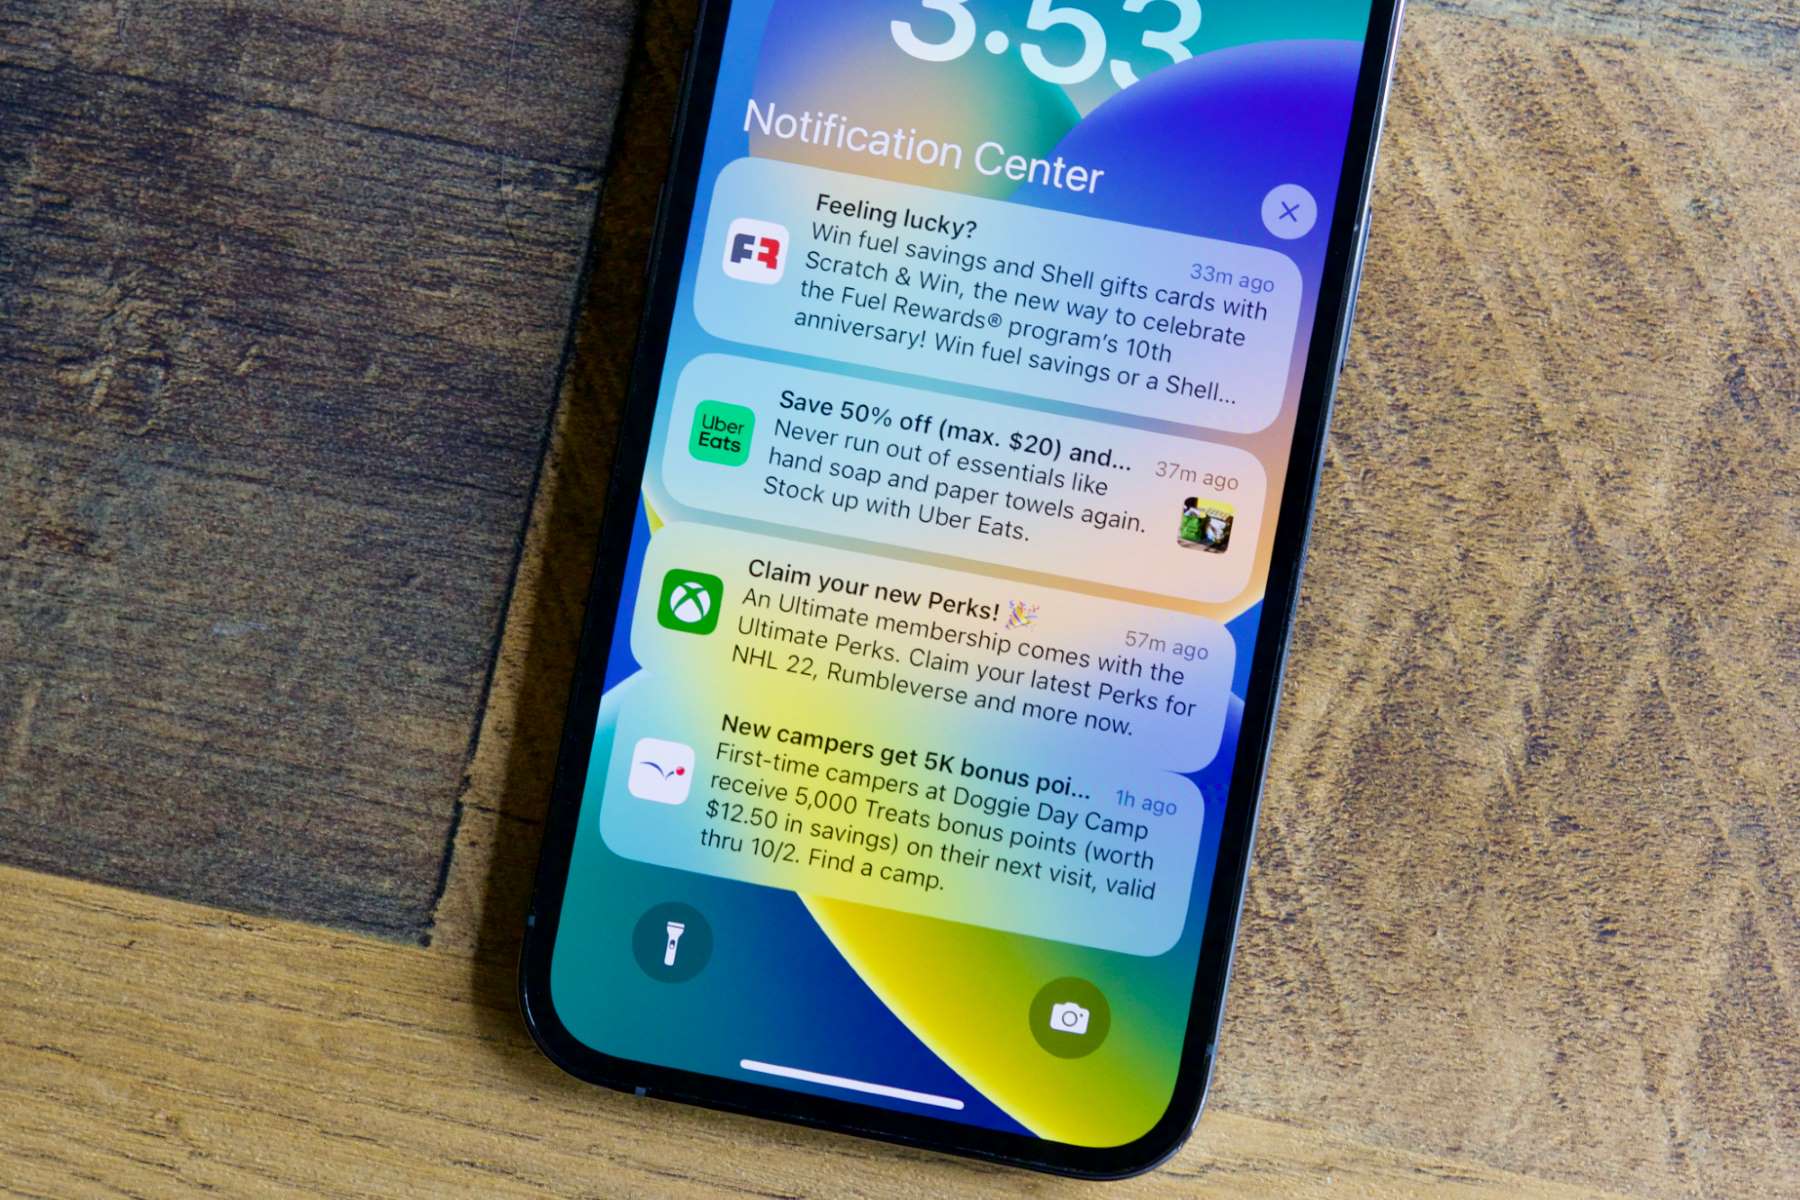 Notification Check: Reviewing Notifications On IPhone 11